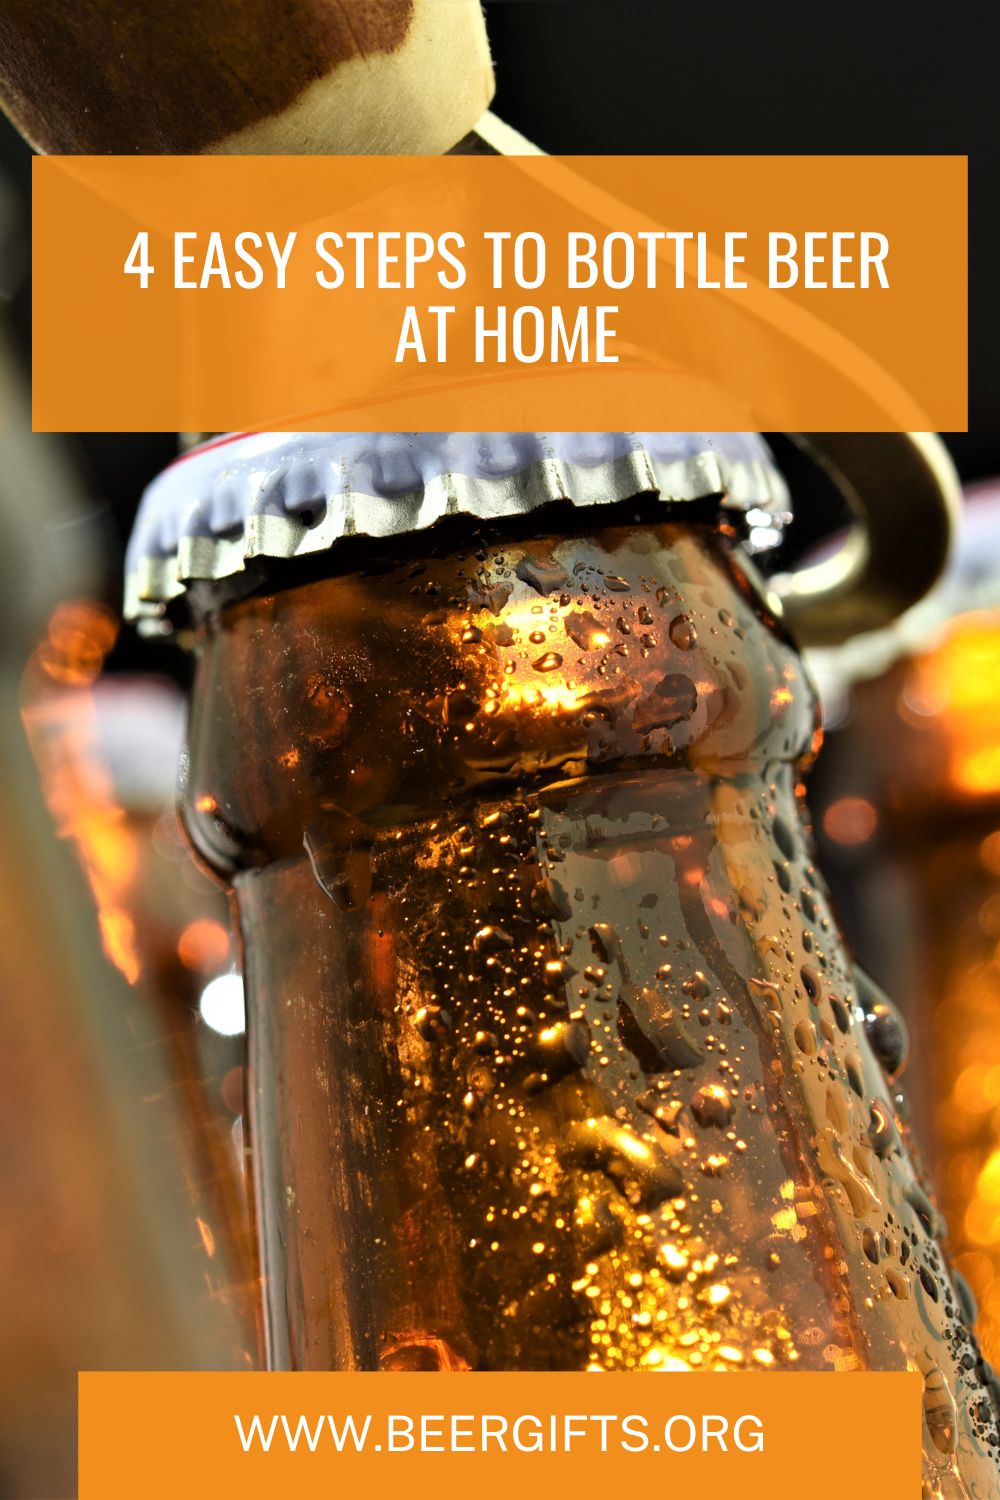 4 Easy Steps To Bottle Beer At Home2